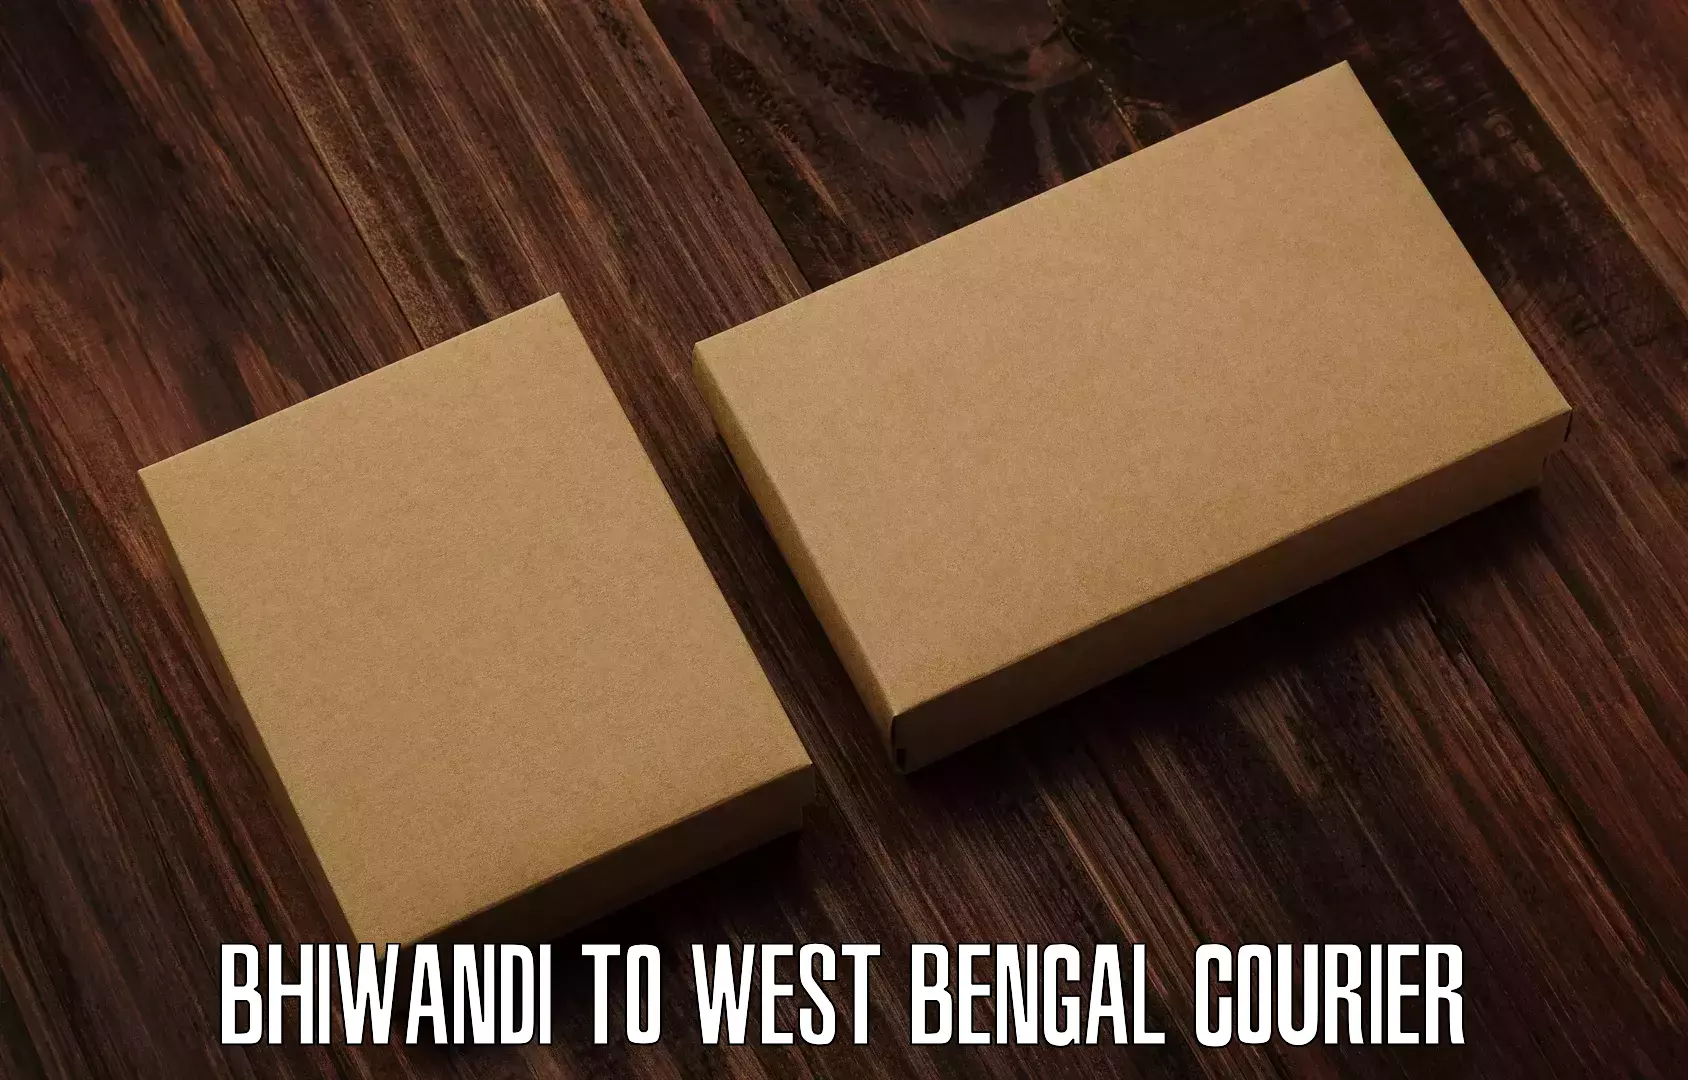 Business delivery service Bhiwandi to North 24 Parganas